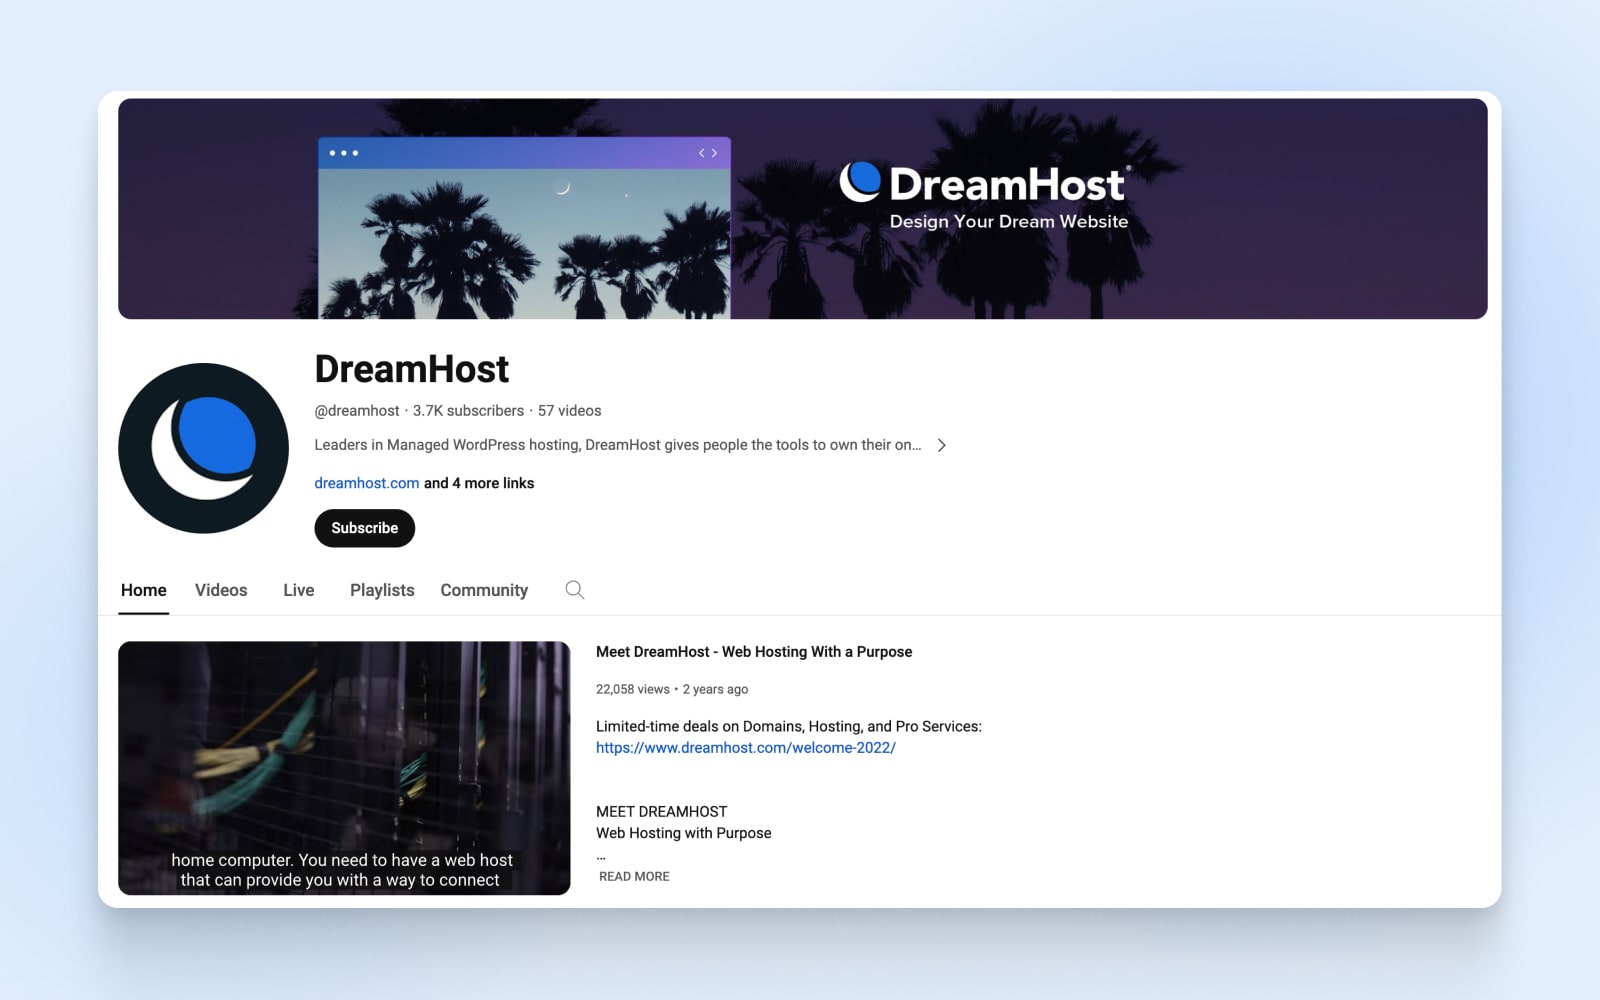 screenshot of the DreamHost youtube homepage with matching DreamHost logos in two places